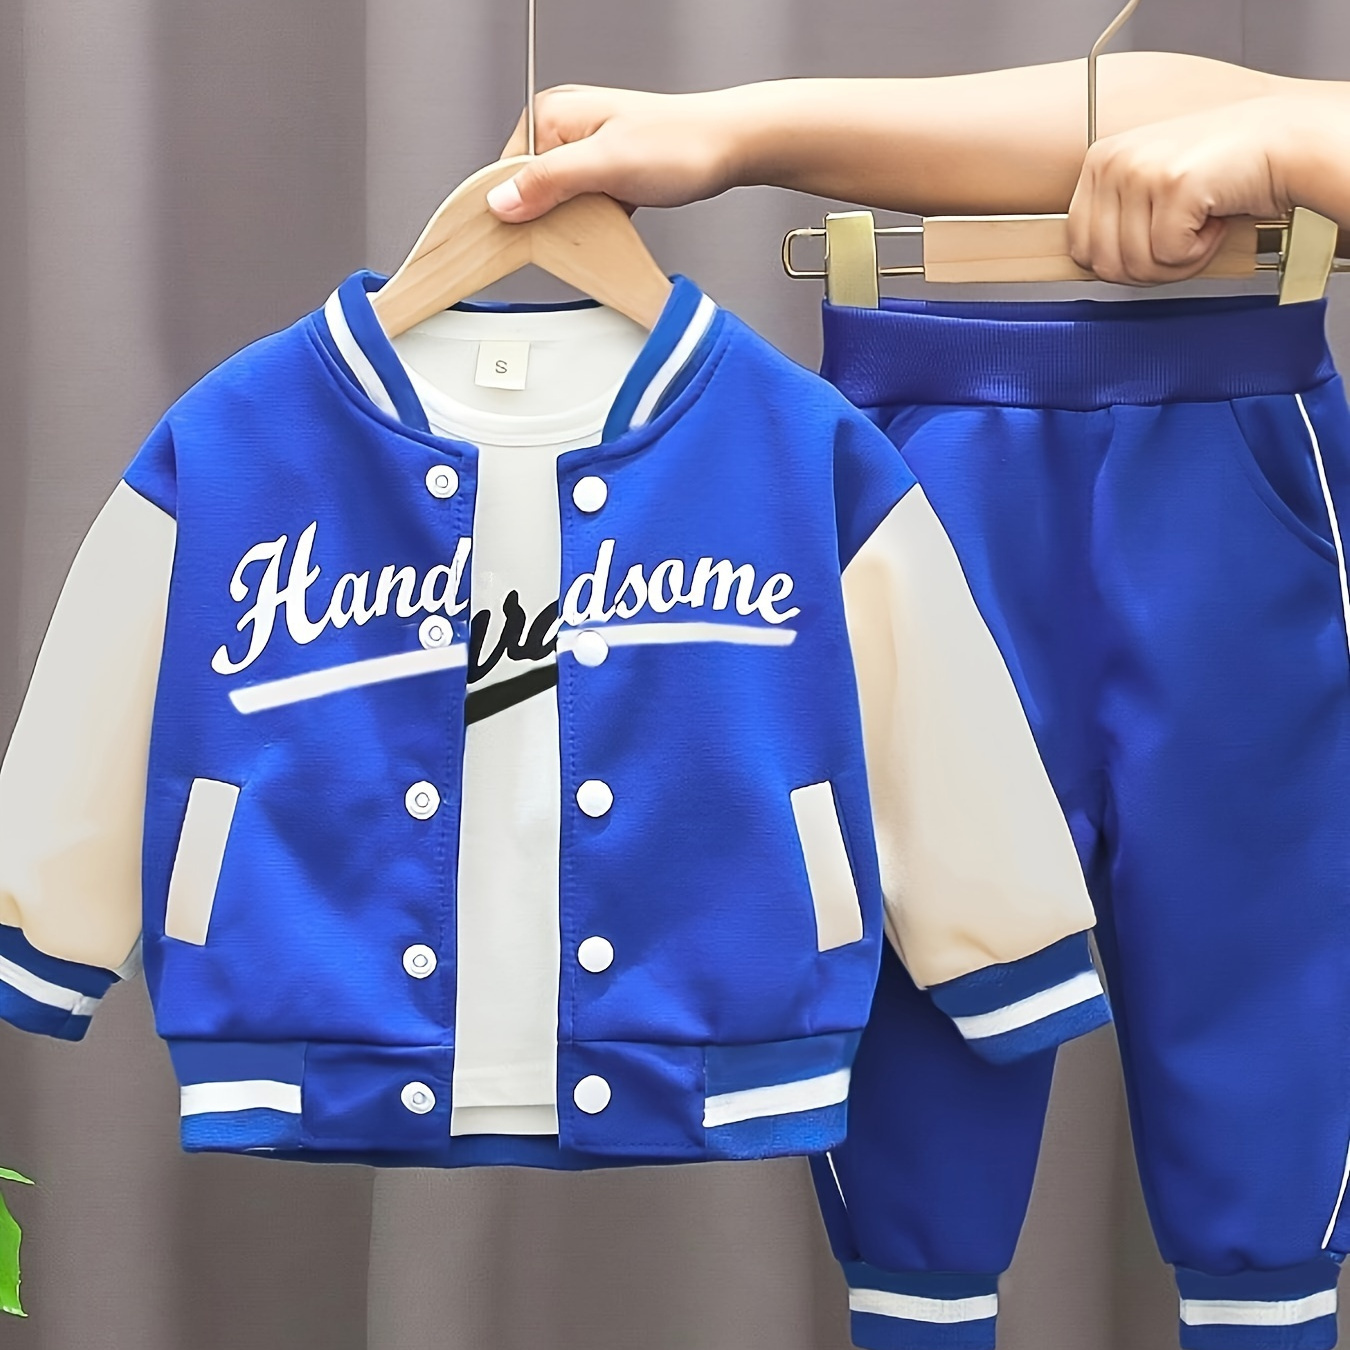 

2pcs Boy's "handsome" Print Varsity Jacket Outfit, Color Clash Jacket & Casual Pants Set, Kid's Clothes For Fall Winter, As Gift